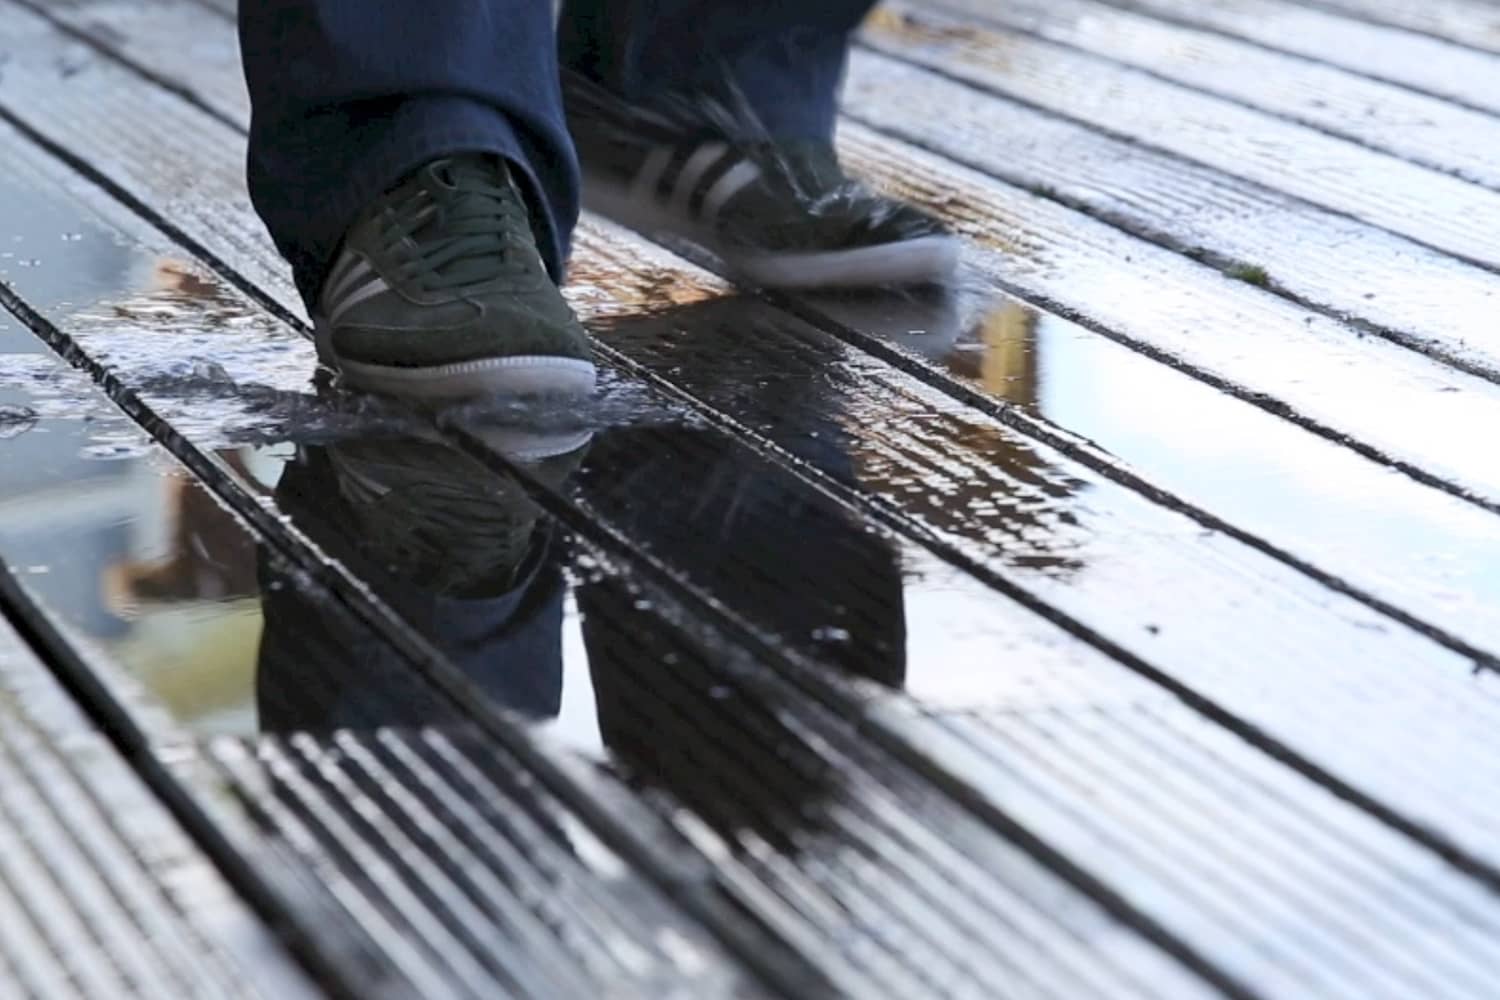 Slippery Decking Day 2023: when are decks most dangerous?